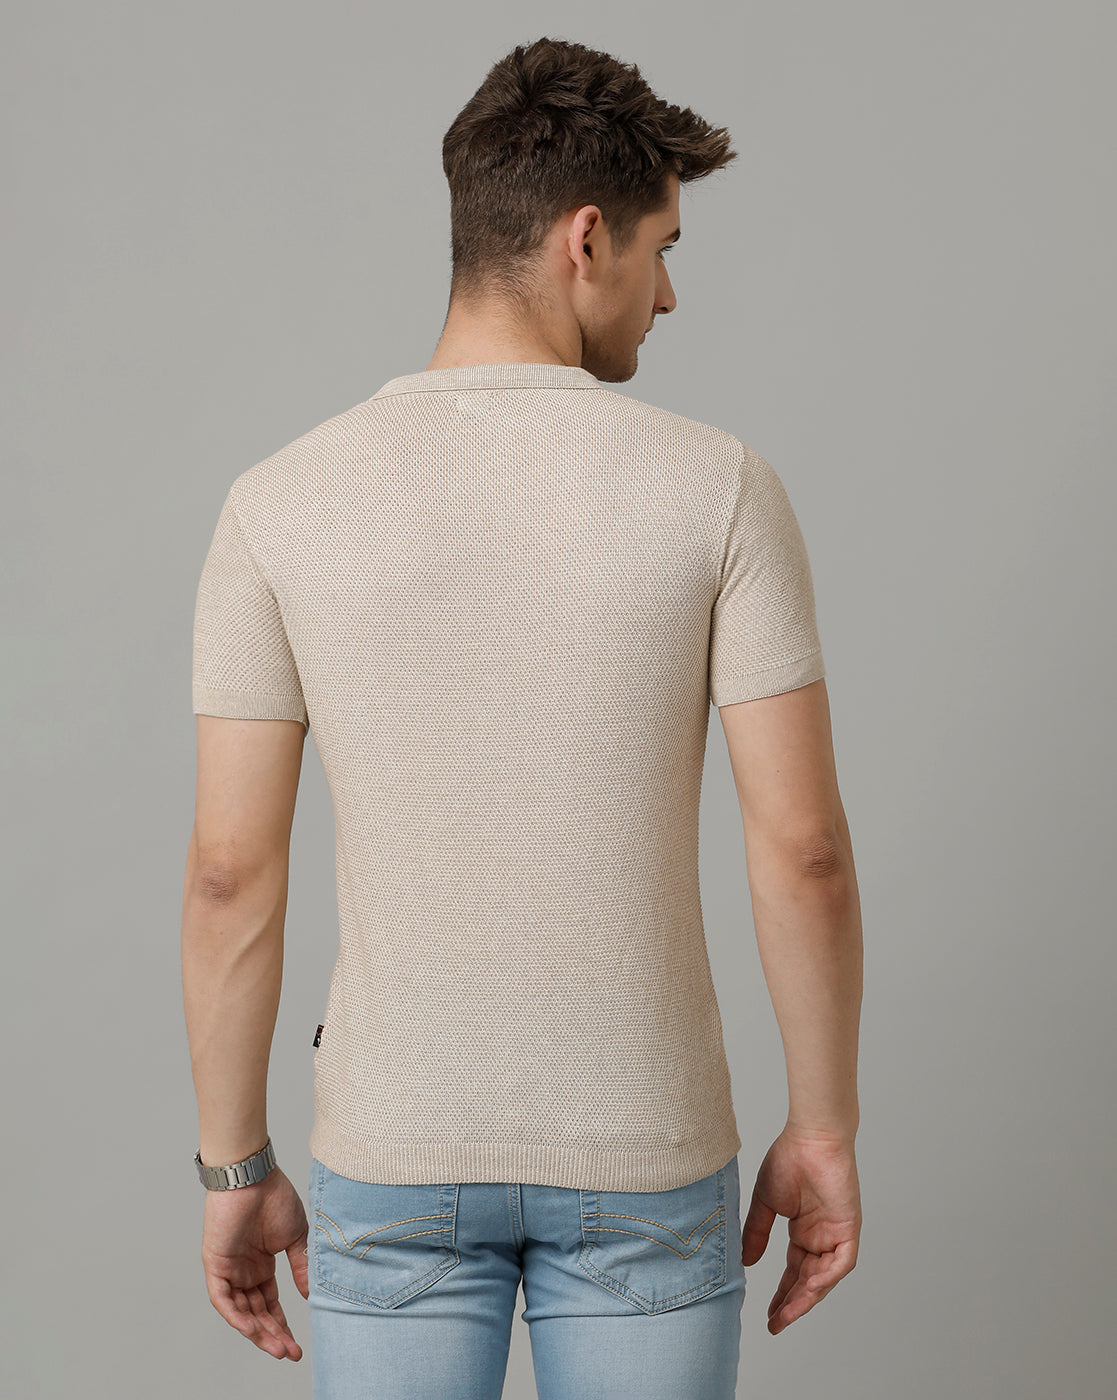 Identiti Beige Half Sleeve Solid Slim Fit Cotton Casual Polo T-Shirt For Men.